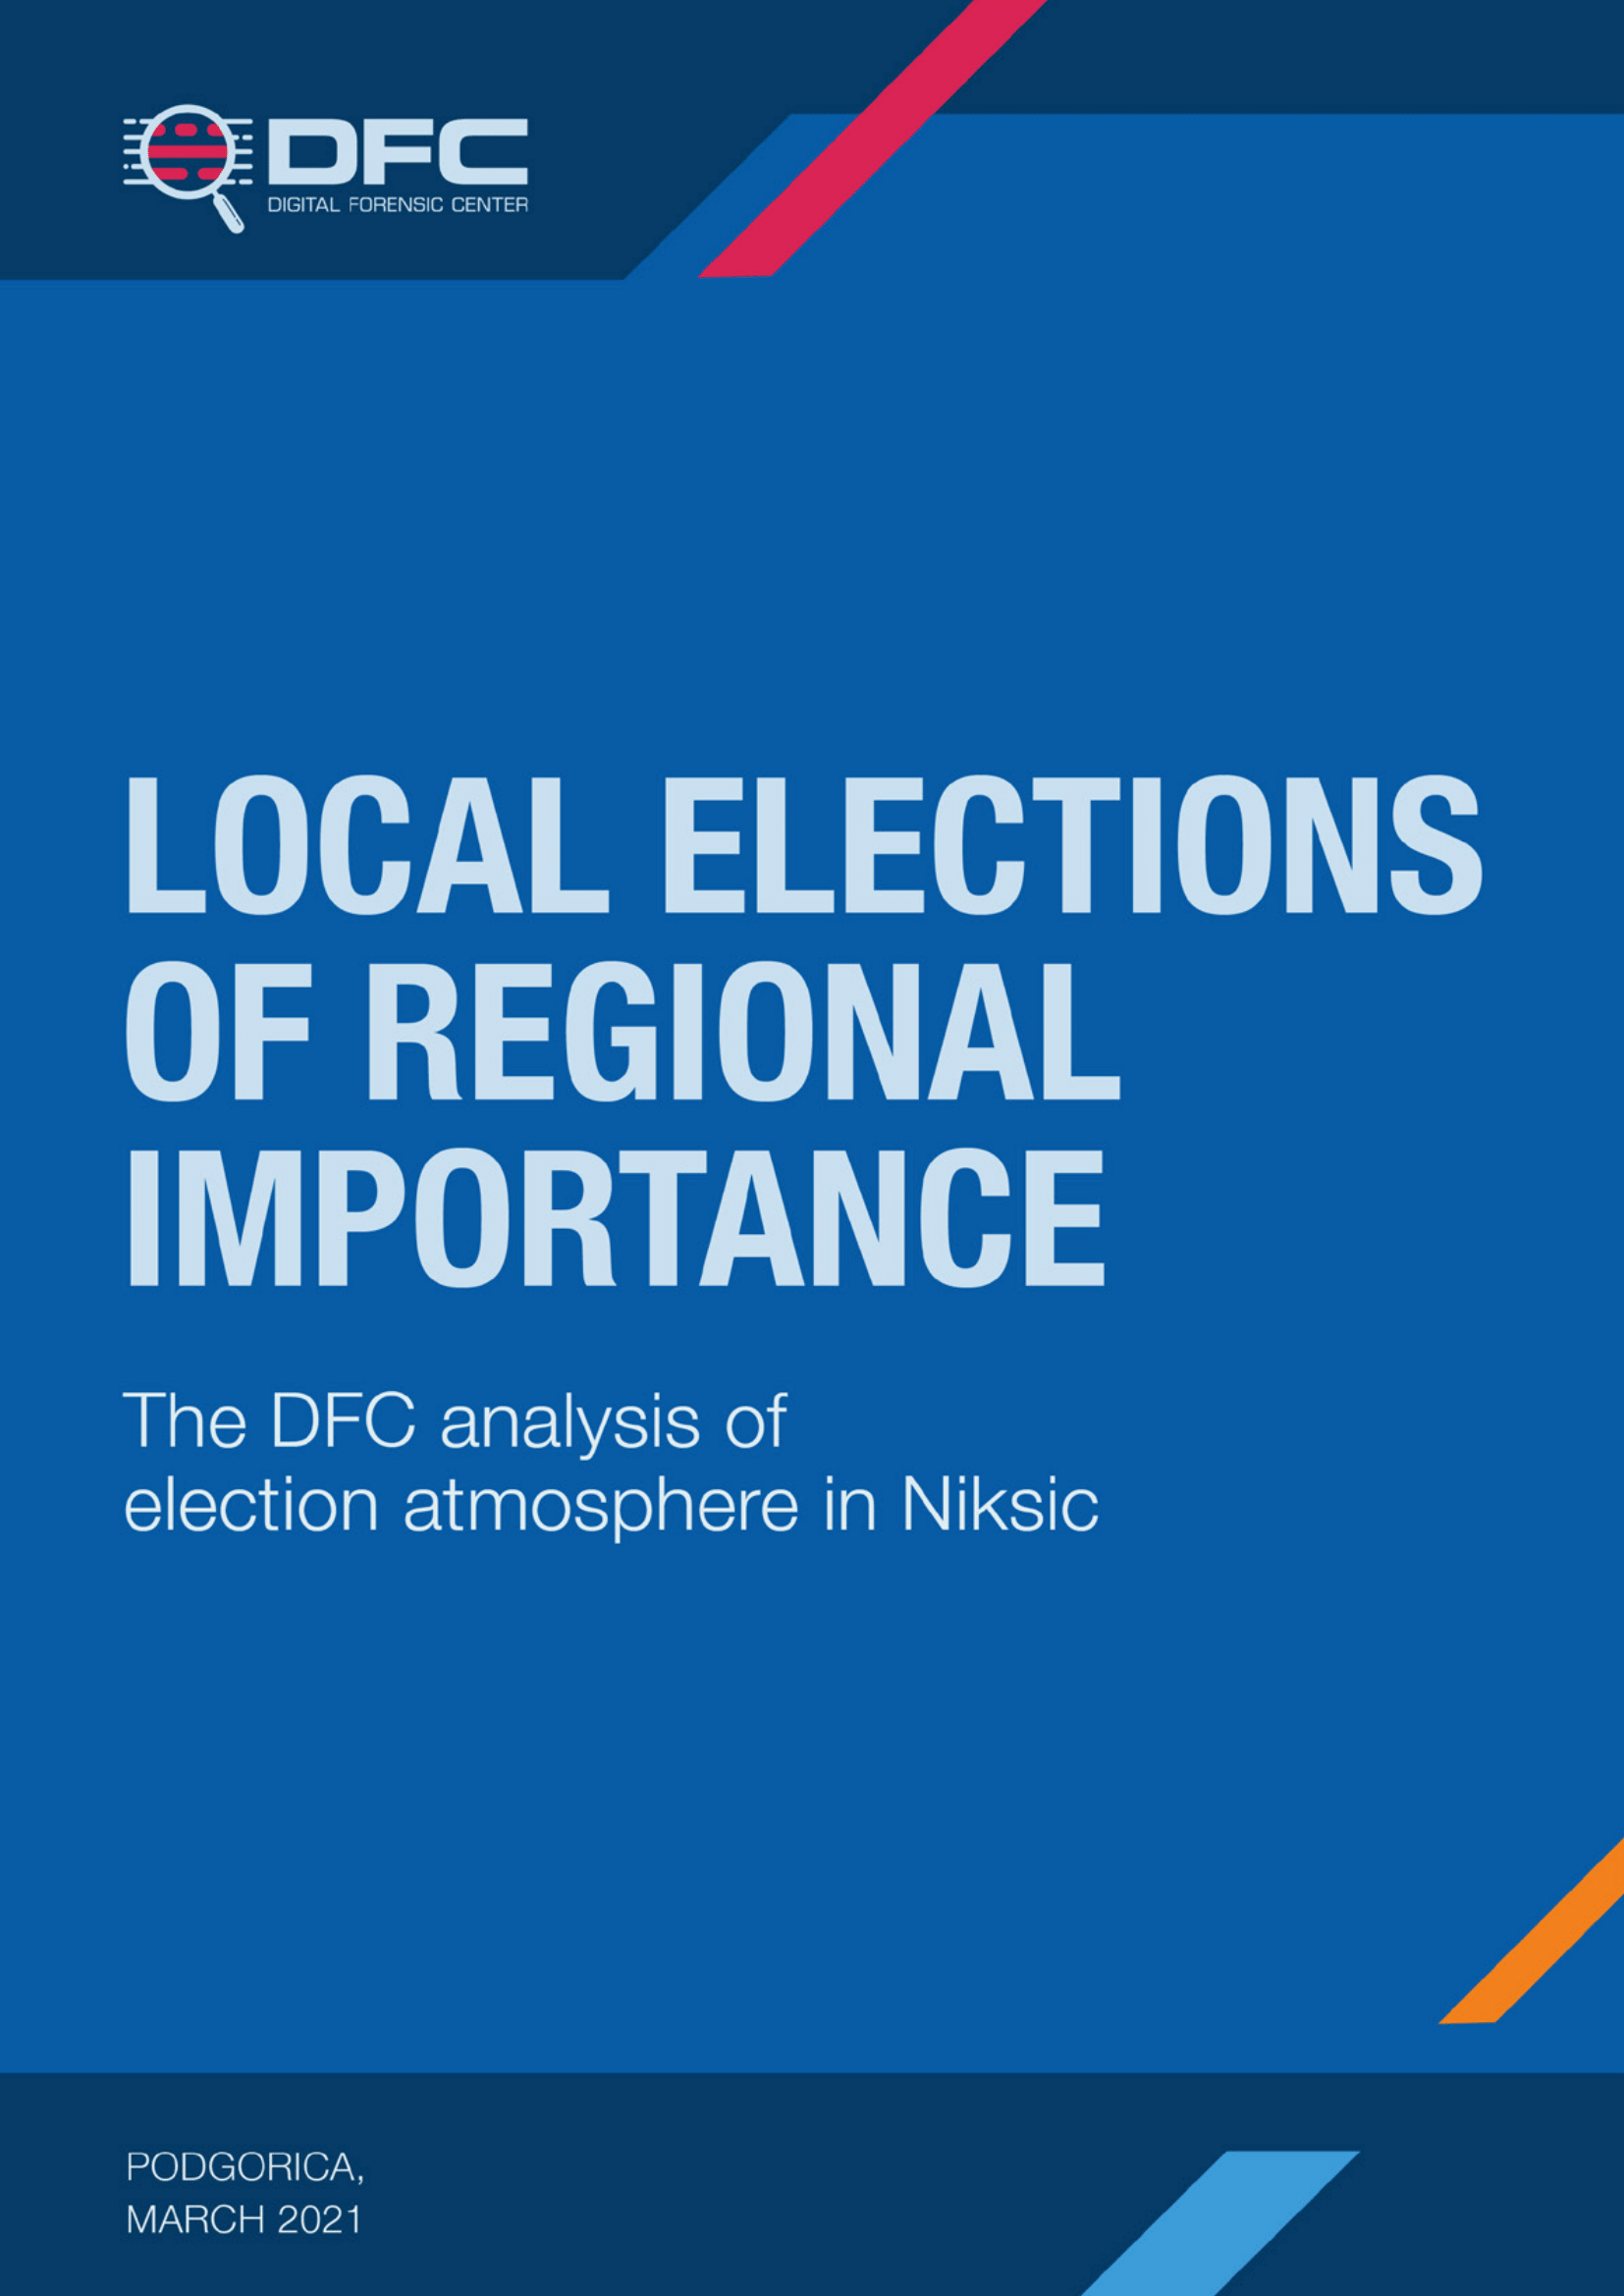 Local-Elections-of-Regional-Importance-1-01